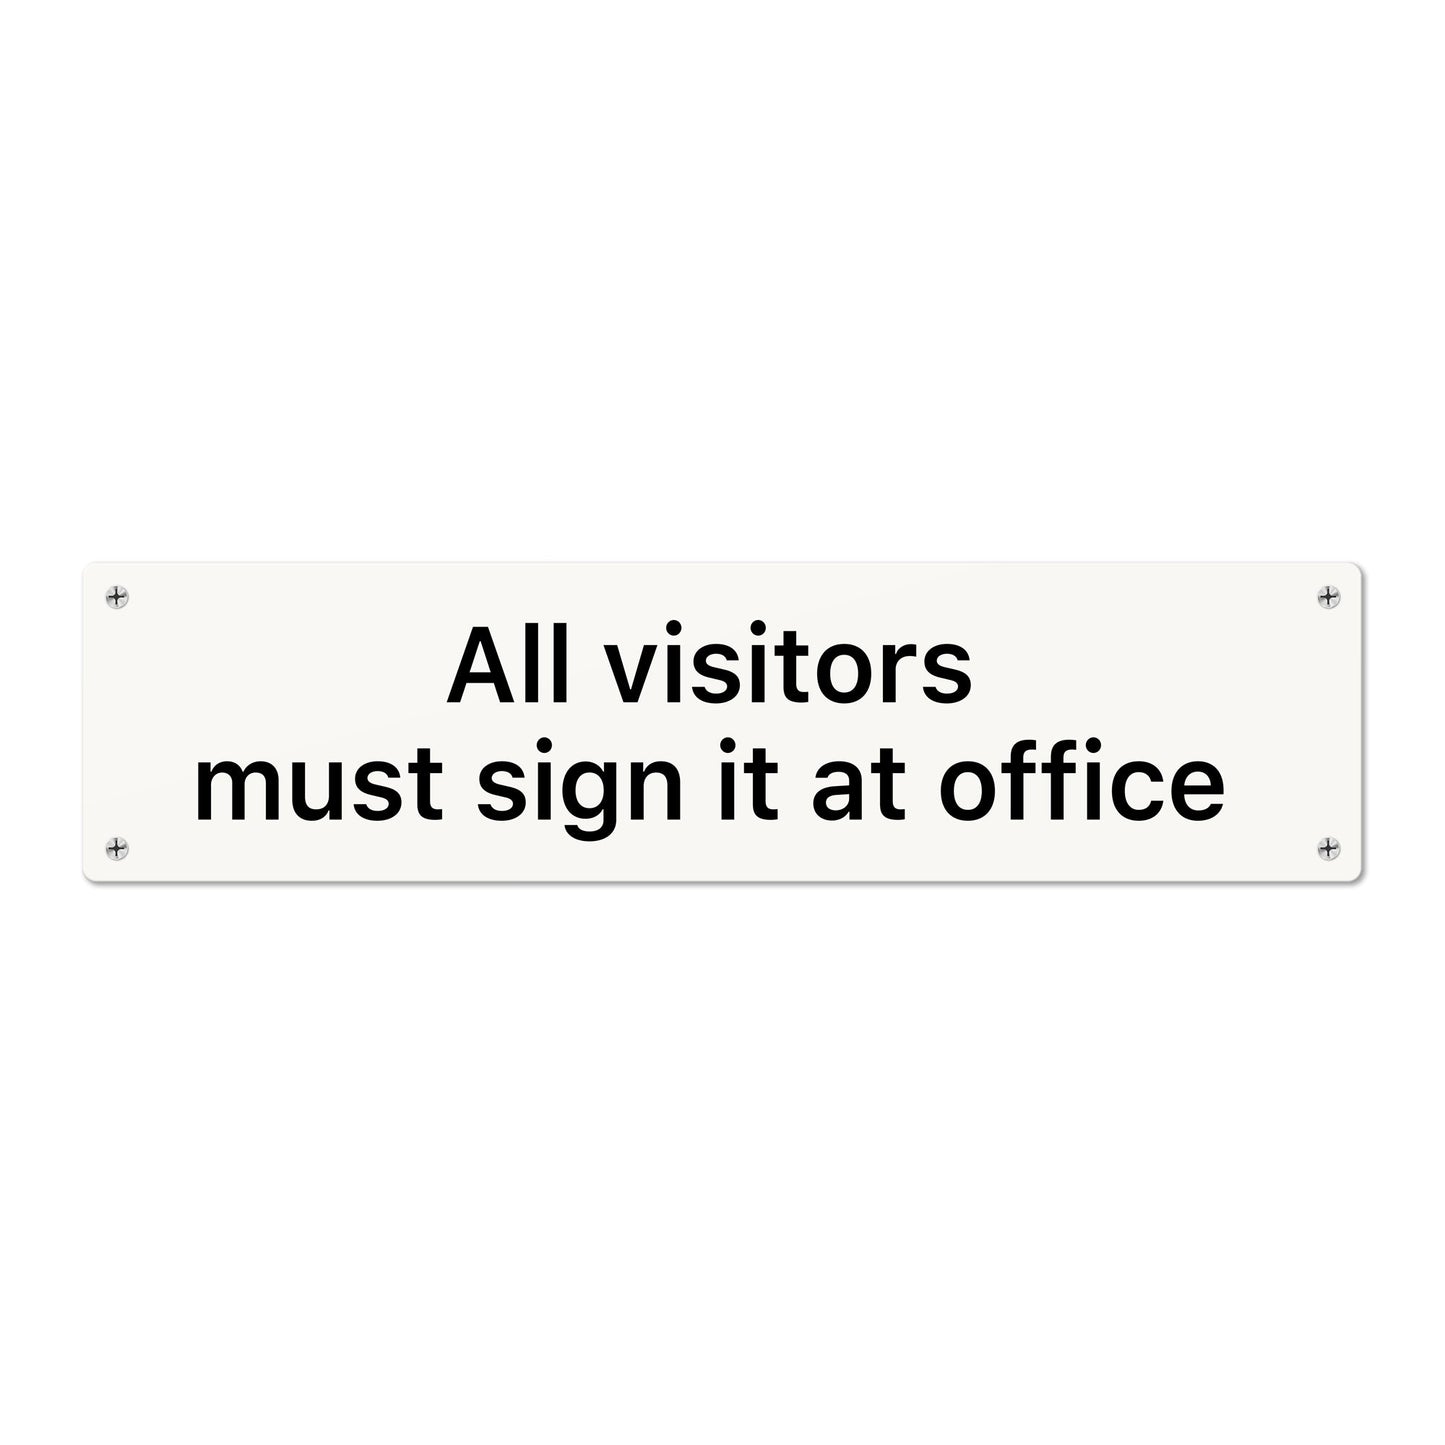 All visitors must sign it at office